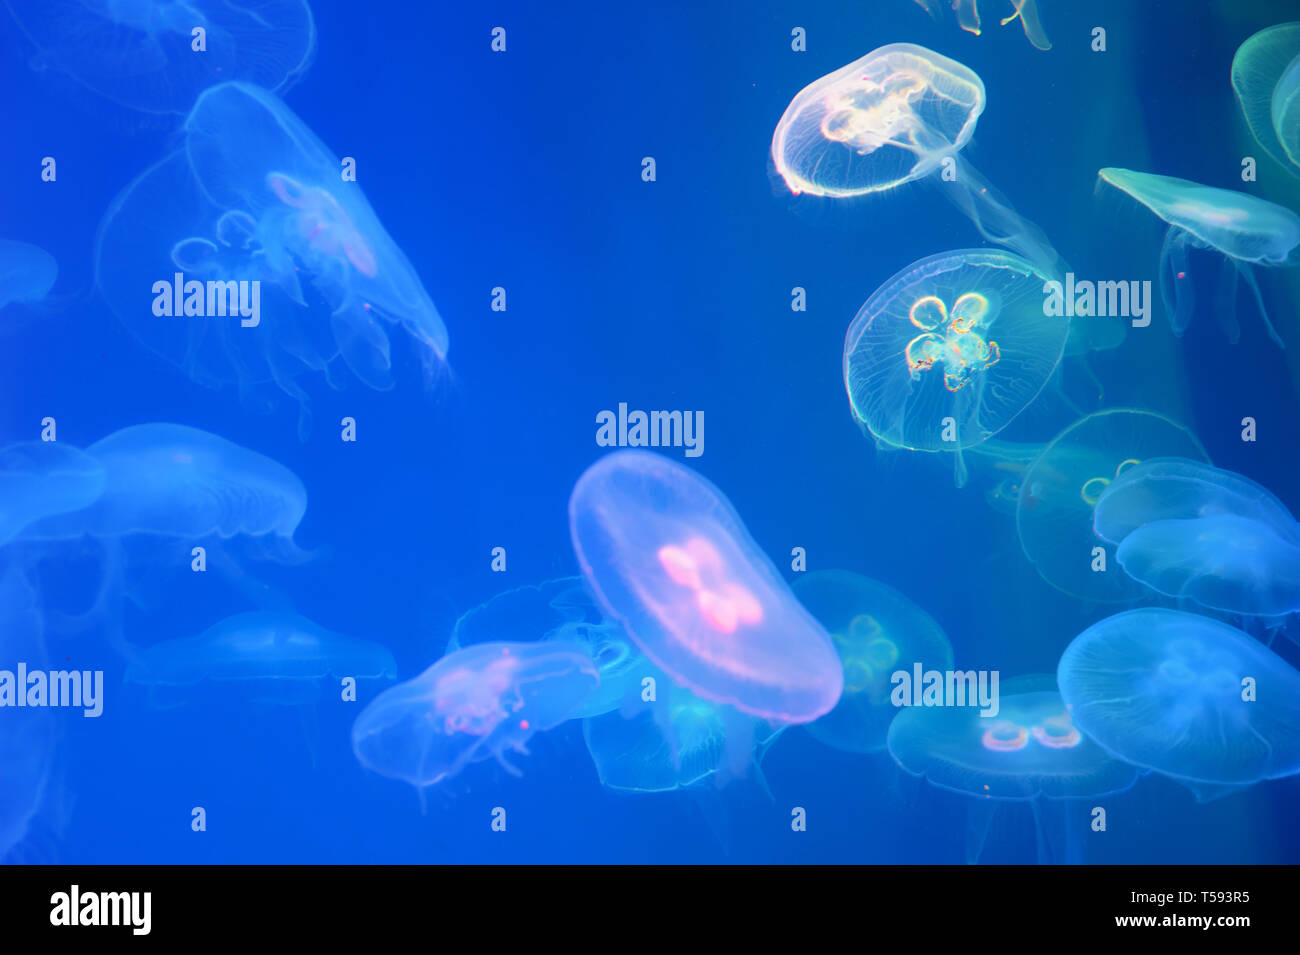 Moon jellyfish Aurelia aurita in the water (also called the common jellyfish, moon jellyfish, moon jelly, or saucer jelly) Stock Photo